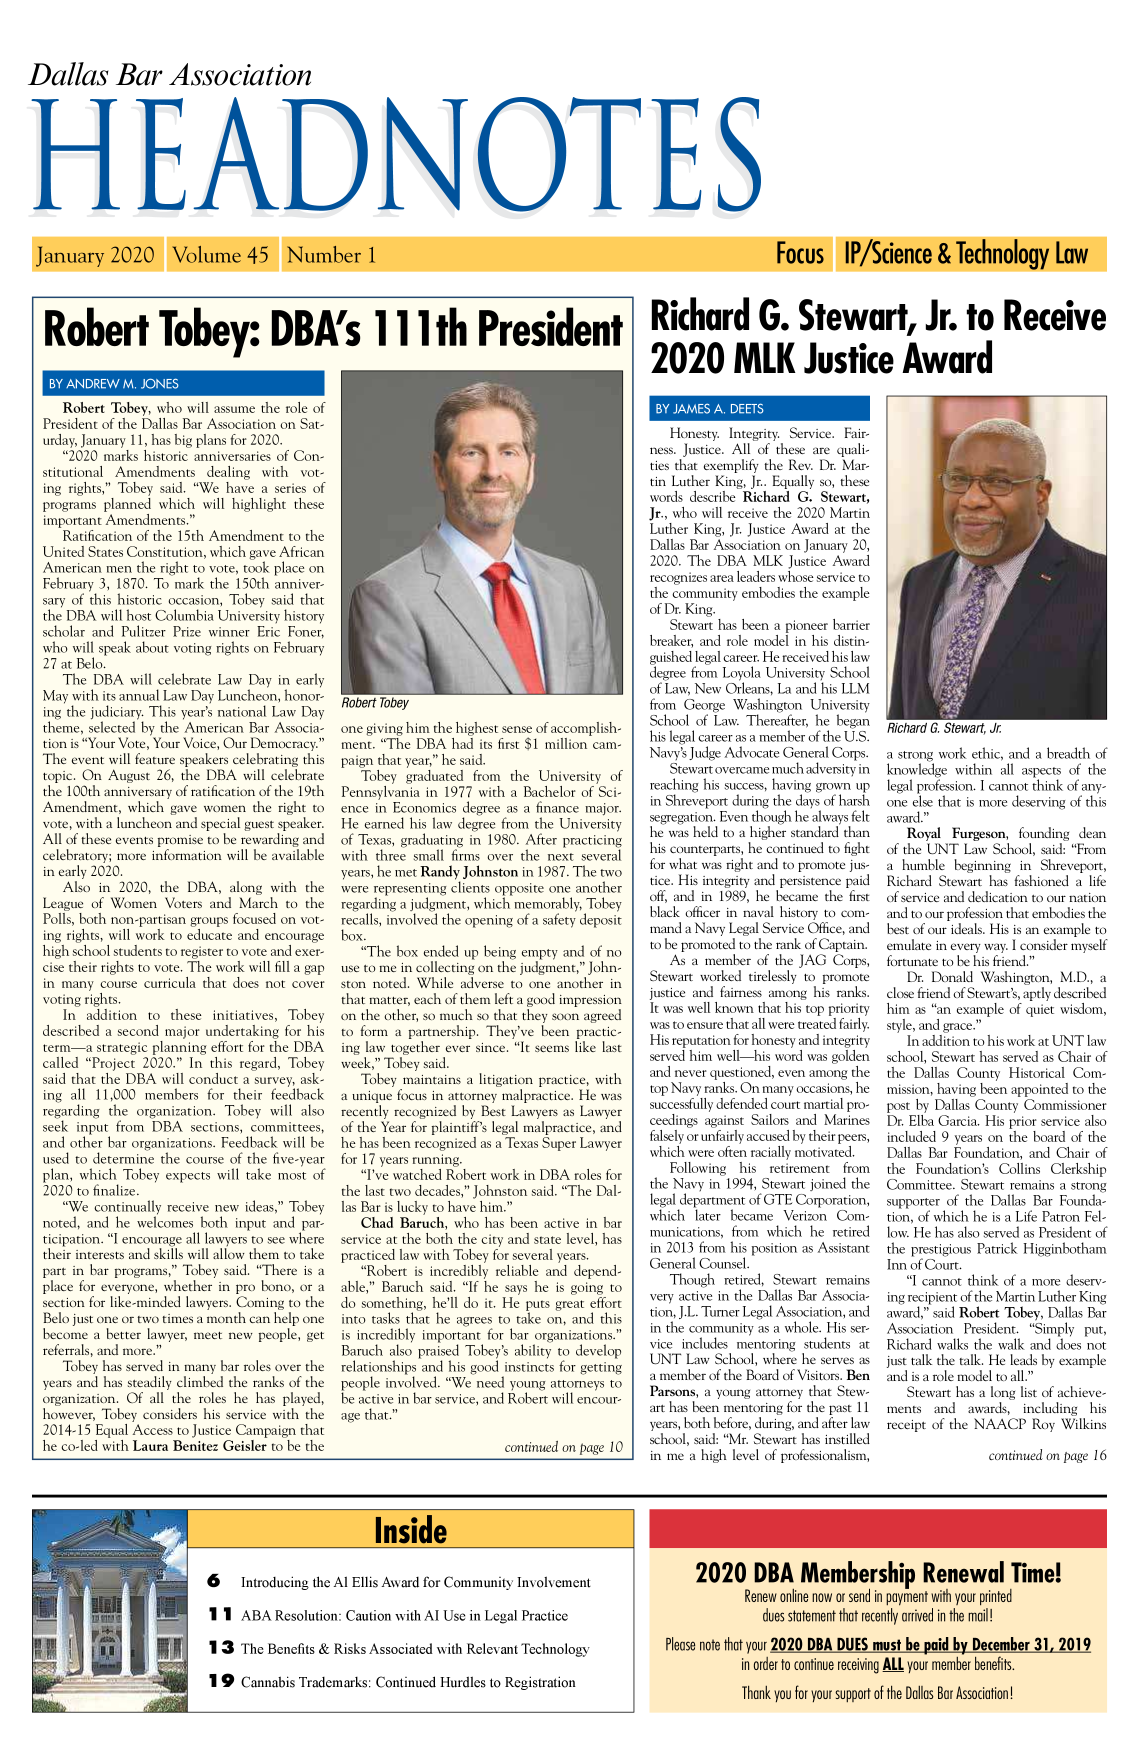 handle is hein.barjournals/hdba0045 and id is 1 raw text is: 



Dallas Bar Association


Robert Tobey: DBA's 111th President


   Robert  Tobey,  who will assume the role of
President of the Dallas Bar Association on Sat-
urday, January 11, has big plans for 2020.
   2020  marks historic anniversaries of Con-
stitutional Amendments dealing with vot-
ing rights, Tobey said. We  have  a series of
programs  planned  which  will highlight these
important Amendments.
   Ratification of the 15th Amendment   to the
United States Constitution, which gave African
American  men  the right to vote, took place on
February 3, 1870. To mark  the 150th  anniver-
sary of this historic occasion, Tobey said that
the DBA  will host Columbia University history
scholar and  Pulitzer Prize winner Eric Foner,
who  will speak about voting rights on February
27 at Belo.
   The  DBA   will celebrate Law Day  in early
May  with its annual Law Day Luncheon, honor-
ing the judiciary. This year's national Law Day
theme,  selected by the American  Bar Associa-
tion is Your Vote, Your Voice, Our Democracy.
The  event will feature speakers celebrating this
topic. On  August  26, the DBA   will celebrate
the 100th anniversary of ratification of the 19th
Amendment, which gave women the right to
vote, with a luncheon and special guest speaker.
All of these events promise to be rewarding and
celebratory; more information will be available
in early 2020.
   Also  in 2020,  the DBA,   along  with  the
League  of Women Voters and March to the
Polls, both non-partisan groups focused on vot-
ing rights, will work to educate and encourage
high school students to register to vote and exer-
cise their rights to vote. The work will fill a gap
in many  course curricula that does not cover
voting rights.
   In  addition  to  these  initiatives, Tobey
described a second  major undertaking  for his
term-a   strategic planning effort for the DBA
called Project 2020.  In this regard, Tobey
said that the DBA  will conduct  a survey, ask-
ing  all 11,000  members   for their feedback
regarding  the organization. Tobey   will also
seek  input from  DBA   sections, committees,
and other  bar organizations. Feedback will be
used to determine  the course of the five-year
plan, which  Tobey  expects will take most  of
2020  to finalize.
   We  continually receive new  ideas, Tobey
noted, and  he welcomes   both input and  par-
ticipation. I encourage all lawyers to see where
their interests and skills will allow them to take
part in bar programs, Tobey said. There is a
place for everyone, whether  in pro bono, or a
section for like-minded lawyers. Coming to the
Belo just one or two times a month can help one
become  a better lawyer, meet new  people, get
referrals, and more.
   Tobey  has served in many bar roles over the
years and has steadily climbed the ranks of the
organization. Of all the roles he  has played,
however,  Tobey considers his service with the
2014-15  Equal Access to Justice Campaign that
he co-led with Laura Benitez Geisler to be the


one giving him the highest sense of accomplish-
ment.  The DBA   had  its first $1 million cam-
paign that year, he said.
   Tobey   graduated  from  the University  of
Pennsylvania  in 1977 with  a Bachelor of Sci-
ence  in Economics  degree as a finance major.
He  earned his law degree from  the University
of Texas, graduating in 1980. After practicing
with  three small firms over the  next several
years, he met Randy Johnston in 1987. The two
were representing clients opposite one another
regarding a judgment, which memorably,  Tobey
recalls, involved the opening of a safety deposit
box.
   The  box ended  up being empty  and of no
use to me in collecting on the judgment, John-
ston noted. While   adverse to one another  in
that matter, each of them left a good impression
on the other, so much so that they soon agreed
to form  a partnership. They've  been practic-
ing law together ever since. It seems like last
week, Tobey said.
   Tobey  maintains  a litigation practice, with
a unique focus in attorney malpractice. He was
recently recognized by Best Lawyers as Lawyer
of the Year for plaintiff's legal malpractice, and
he has been recognized as a Texas Super Lawyer
for 17 years running.
   I've watched Robert work  in DBA  roles for
the last two decades, Johnston said. The Dal-
las Bar is lucky to have him.
   Chad   Baruch, who  has  been active in bar
service at the both the city and state level, has
practiced law with Tobey for several years.
   Robert  is incredibly reliable and depend-
able, Baruch  said. If he says he is going to
do something,  he'll do it. He puts great effort
into tasks that he agrees to take on, and this
is incredibly important for bar organizations.
Baruch  also praised Tobey's ability to develop
relationships and his good instincts for getting
people involved. We  need young  attorneys to
be active in bar service, and Robert will encour-
age that.

                           continued on page 10


Richard G. Stewart, Jr. to Receive


2020 MLK Justice Award


   Honesty.  Integrity. Service. Fair-
ness. Justice. All of these are quali-
ties that exemplify the Rev. Dr. Mar-
tin Luther King, Jr.. Equally so, these
words  describe Richard G.  Stewart,
Jr., who will receive the 2020 Martin
Luther King, Jr. Justice Award at the
Dallas Bar Association on January 20,
2020. The  DBA   MLK   Justice Award
recognizes area leaders whose service to
the community  embodies the example
of Dr. King.
   Stewart has been a pioneer barrier
breaker, and role model in his distin-
guished legal career. He received his law
degree from Loyola University School
of Law, New Orleans, La and his LLM
from  George  Washington  University
School  of Law. Thereafter, he began
his legal career as a member of the U.S.
Navy's Judge Advocate General Corps.
   Stewart overcame much  adversity in
reaching his success, having grown up
in Shreveport during the days of harsh
segregation. Even though he always felt
he was held to a higher standard than
his counterparts, he continued to fight
for what was right and to promote jus-
tice. His integrity and persistence paid
off, and in 1989, he became  the first
black officer in naval history to com-
mand  a Navy Legal Service Office, and
to be promoted to the rank of Captain.
   As  a member   of the JAG  Corps,
Stewart worked  tirelessly to promote
justice and fairness among his ranks.
It was well known that his top priority
was to ensure that all were treated fairly.
His reputation for honesty and integrity
served him well-his word  was golden
and never questioned, even among the
top Navy ranks. On many occasions, he
successfully defended court martial pro-
ceedings against Sailors and Marines
falsely or unfairly accused by their peers,
which were often racially motivated.
   Following   his  retirement  from
the Navy  in 1994, Stewart joined the
legal department of GTE Corporation,
which  later became   Verizon Com-
munications, from  which  he  retired
in 2013 from his position as Assistant
General Counsel.
   Though   retired, Stewart remains
very active in the Dallas Bar Associa-
tion, J.L. Turner Legal Association, and
in the community  as a whole. His ser-
vice includes mentoring  students at
UNT   Law  School, where he serves as
a member  of the Board of Visitors. Ben
Parsons, a young attorney that Stew-
art has been mentoring for the past 11
years, both before, during, and after law
school, said: Mr. Stewart has instilled
in me  a high level of professionalism,


Ricnara . Stewart, Jr
a strong work ethic, and a breadth of
knowledge  within  all aspects of the
legal profession. I cannot think of any-
one else that is more deserving of this
award.
   Royal   Furgeson,  founding dean
of the UNT   Law School, said: From
a  humble  beginning  in Shreveport,
Richard  Stewart has fashioned a life
of service and dedication to our nation
and to our profession that embodies the
best of our ideals. His is an example to
emulate in every way. I consider myself
fortunate to be his friend.
   Dr. Donald  Washington,  M.D.,  a
close friend of Stewart's, aptly described
him  as an example of quiet wisdom,
style, and grace.
   In addition to his work at UNT law
school, Stewart has served as Chair of
the  Dallas County  Historical Com-
mission, having been appointed to the
post by Dallas County Commissioner
Dr. Elba Garcia. His prior service also
included 9 years on the board of the
Dallas Bar Foundation, and  Chair of
the  Foundation's Collins  Clerkship
Committee.  Stewart remains a strong
supporter of the Dallas Bar Founda-
tion, of which he is a Life Patron Fel-
low. He has also served as President of
the prestigious Patrick Higginbotham
Inn of Court.
   I cannot think of a more deserv-
ing recipient of the Martin Luther King
award, said Robert Tobey, Dallas Bar
Association  President. Simply put,
Richard walks the walk and  does not
just talk the talk. He leads by example
and is a role model to all.
   Stewart has a long list of achieve-
ments   and  awards,  including  his
receipt of the NAACP Roy Wilkins

                 continued on page 16


6     Introducing the Al Ellis Award for Community Involvement

1  1 ABA   Resolution: Caution with Al Use in Legal Practice

1 3   The Benefits & Risks Associated with Relevant Technology

1 9   Cannabis Trademarks: Continued  Hurdles to Registration


